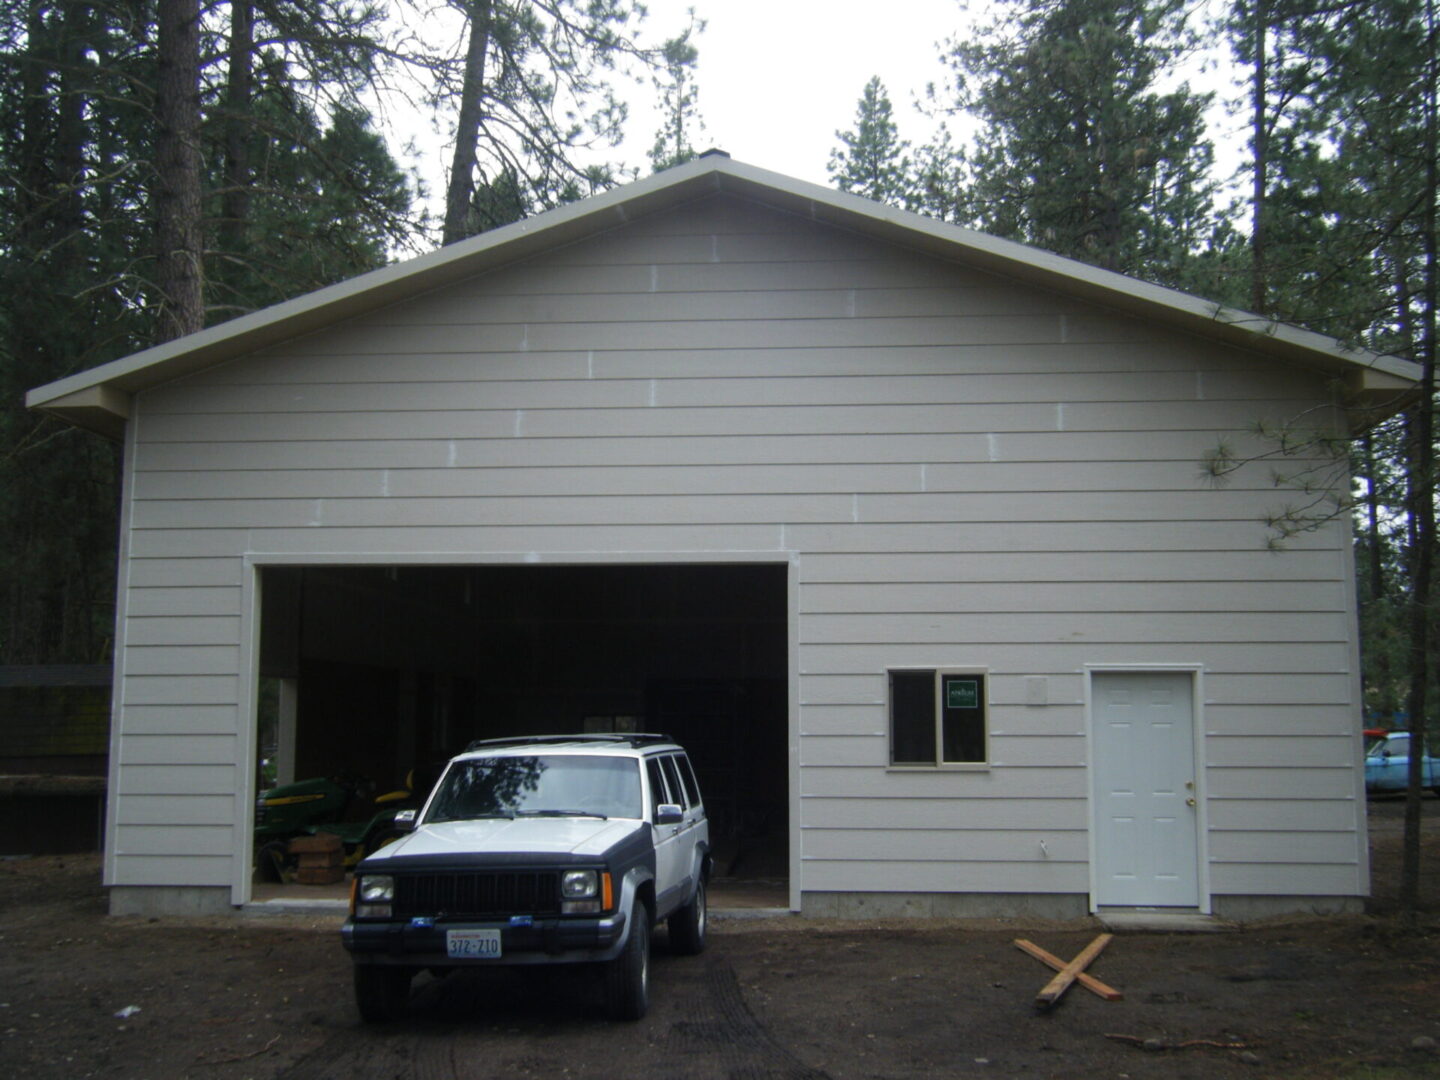 Front view of a light-colored house with a car emerging from the garage